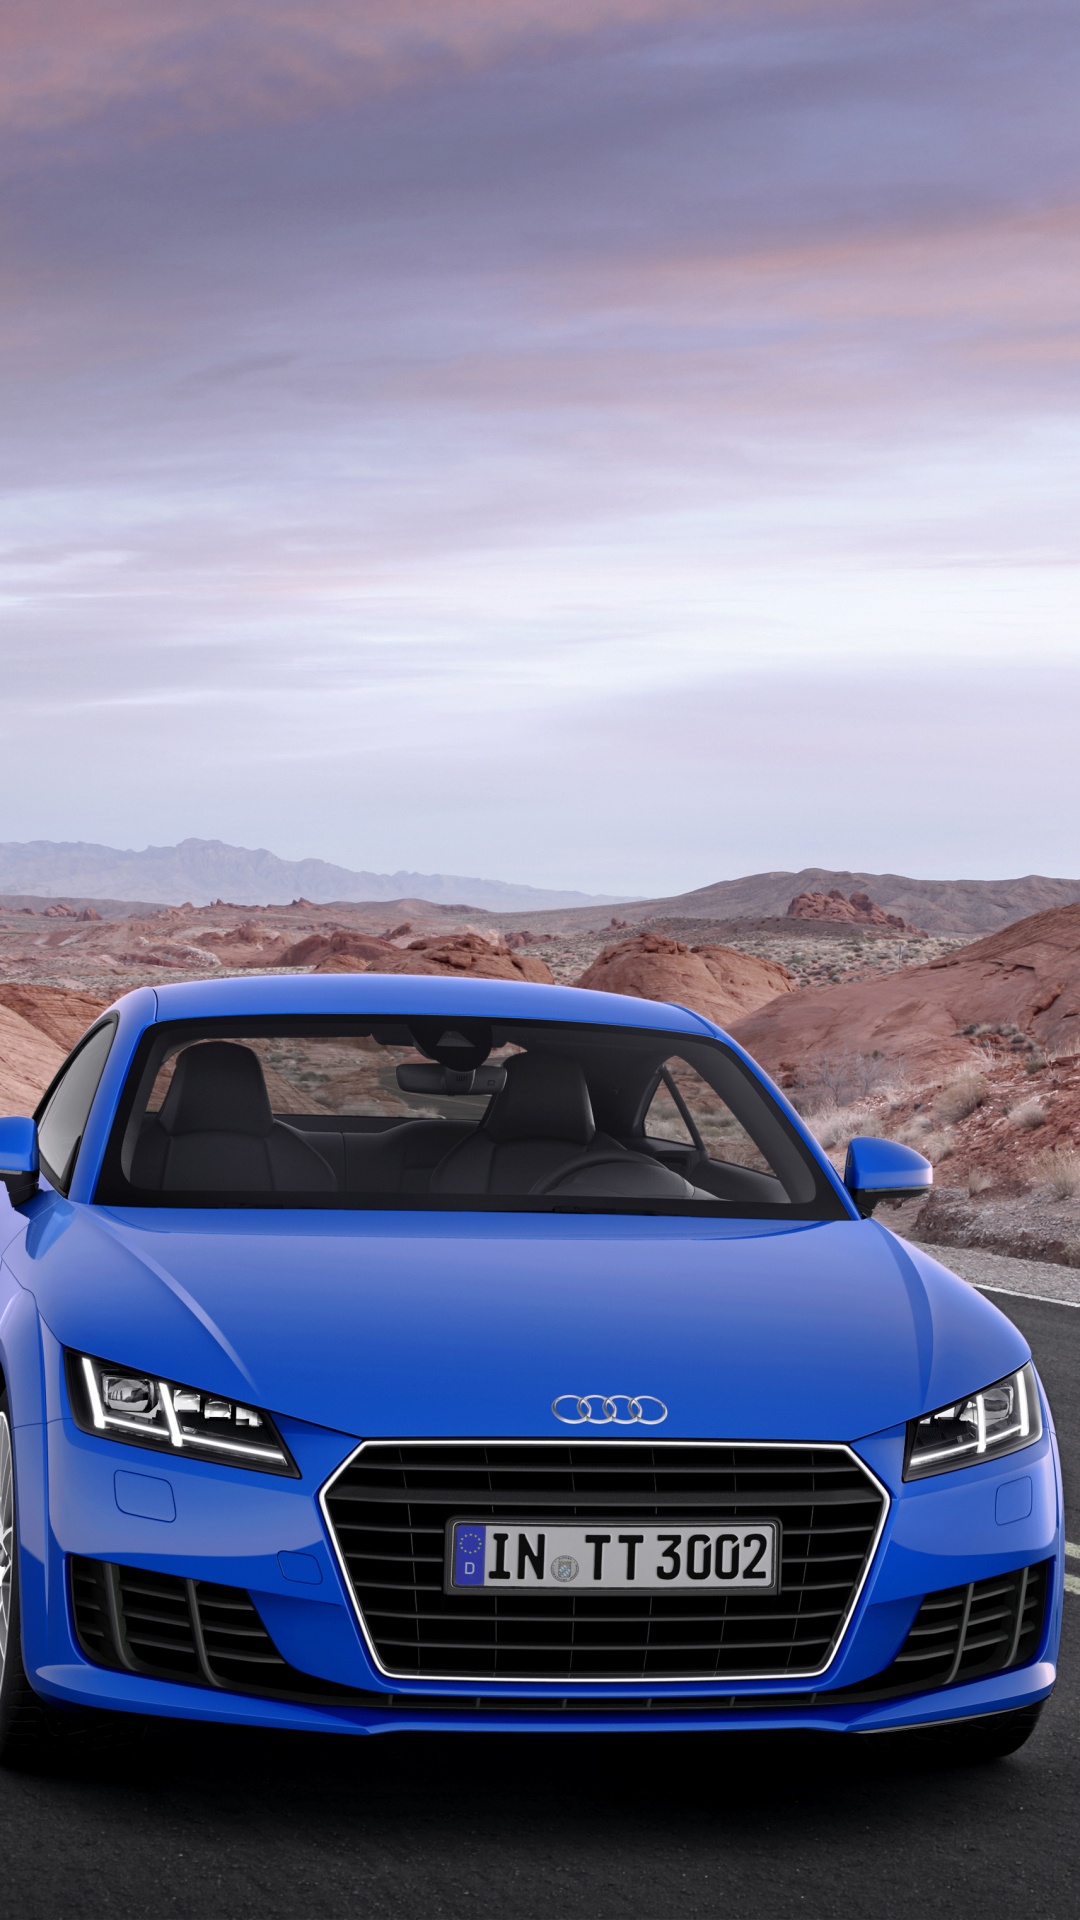 Blue Audi a 4 on Road During Daytime. Wallpaper in 1080x1920 Resolution